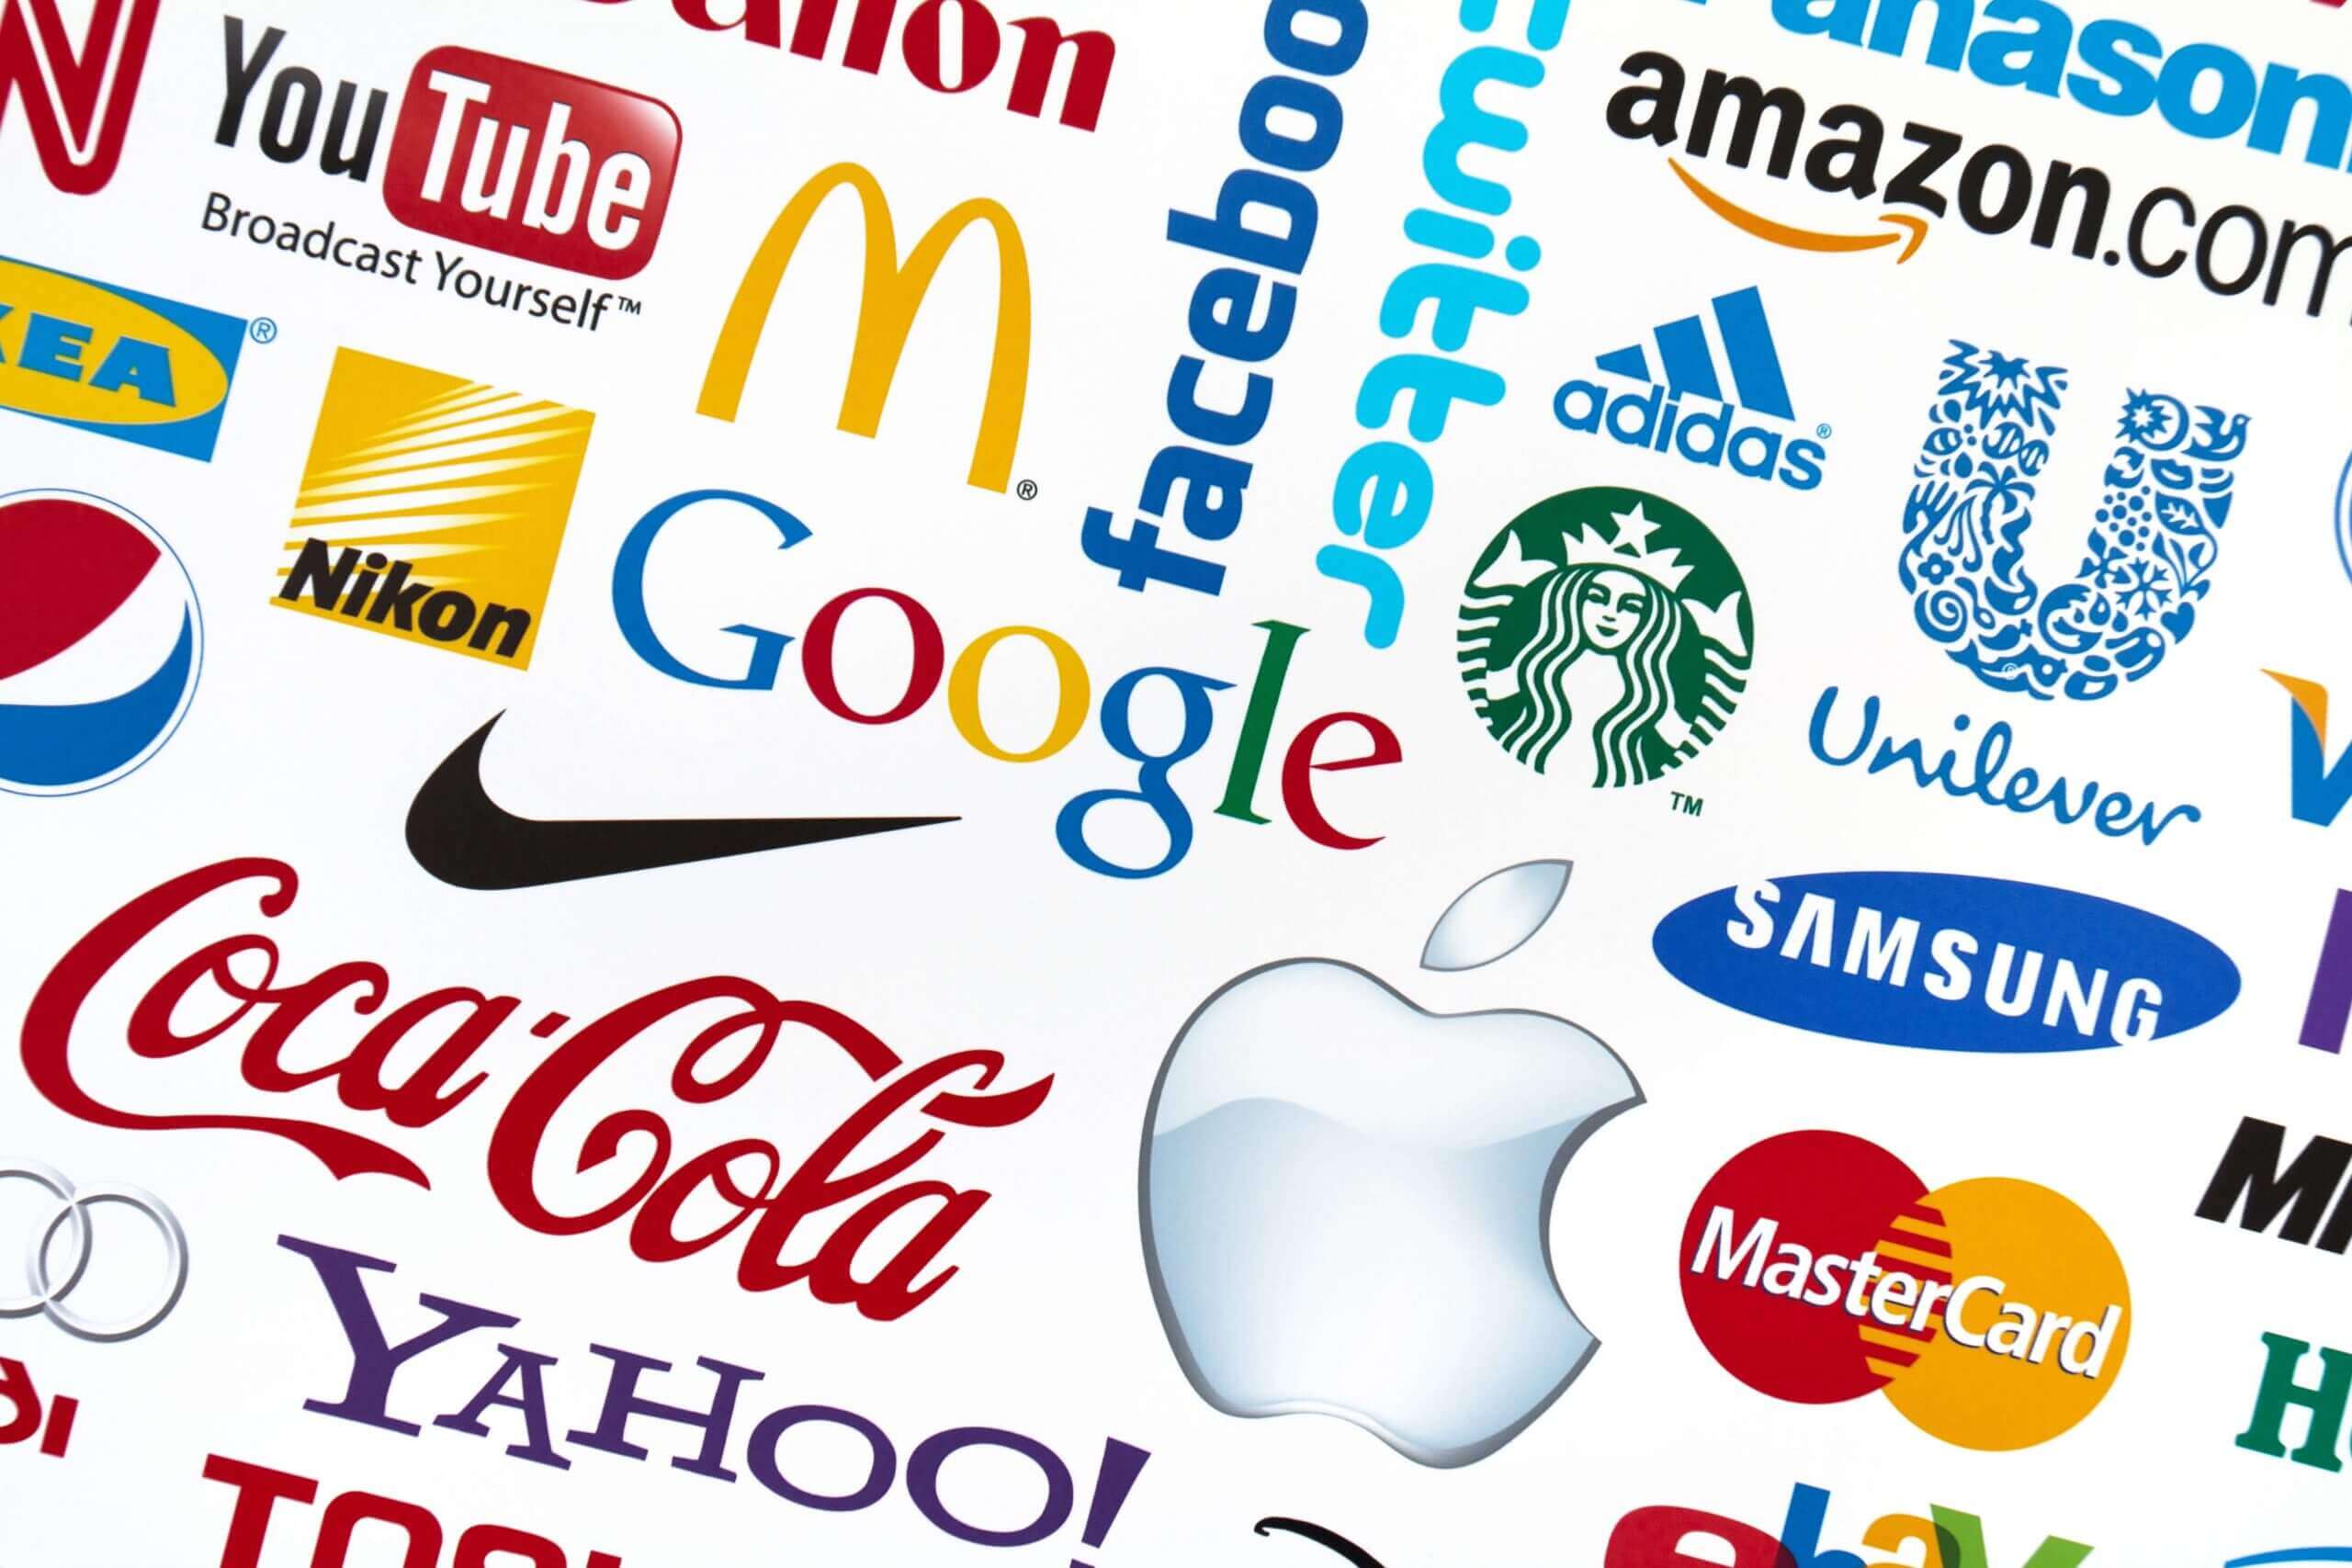 What Is Branding And Why Is It Important For Your Business